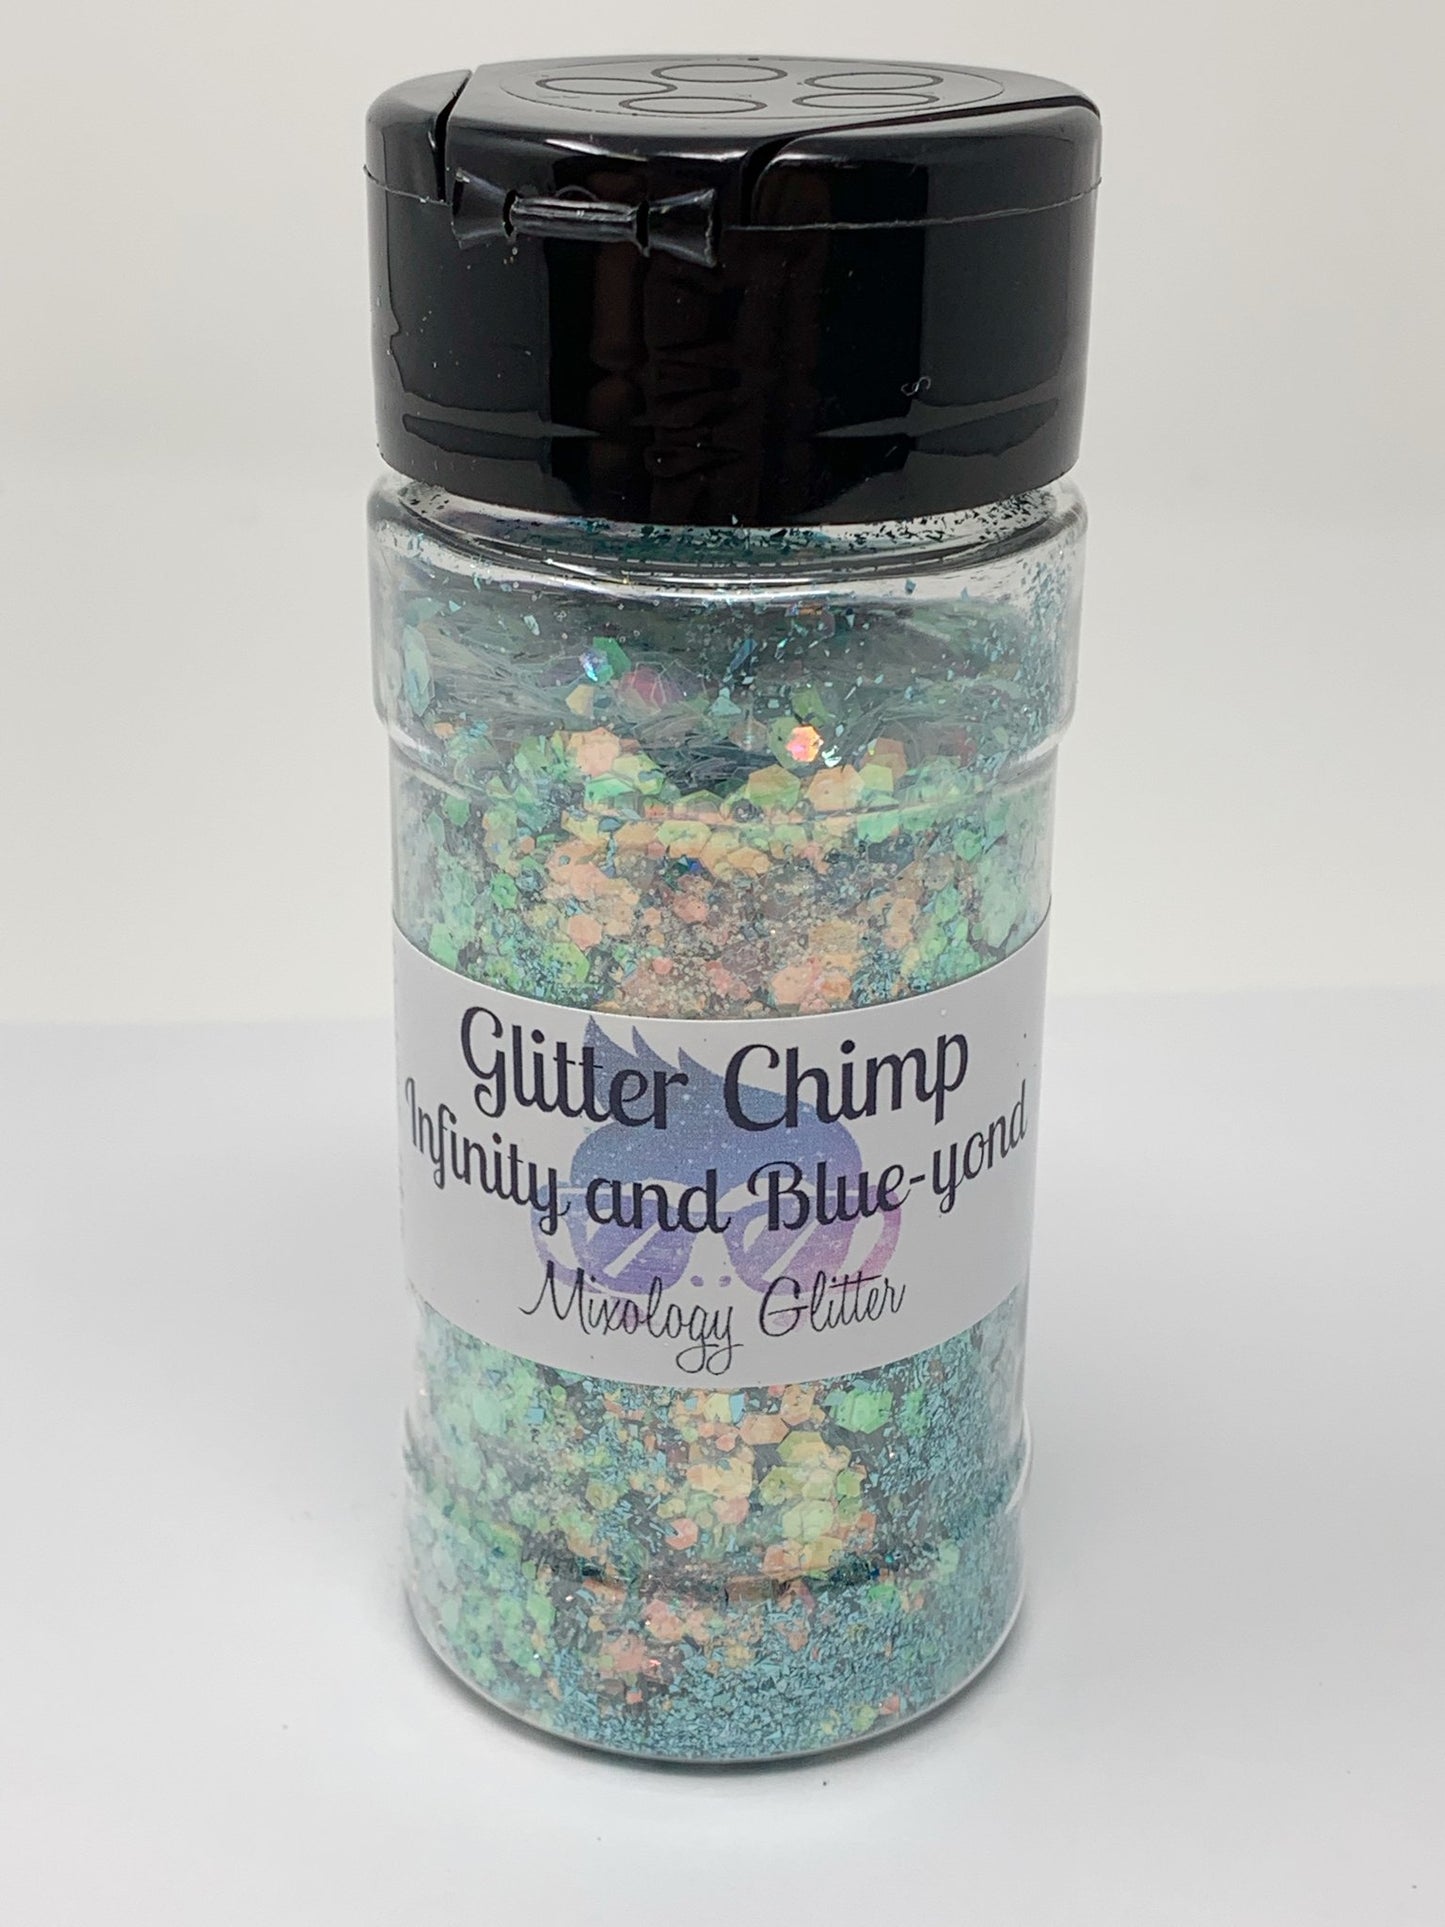 Infinity And Blue-Yond Mixology Glitter